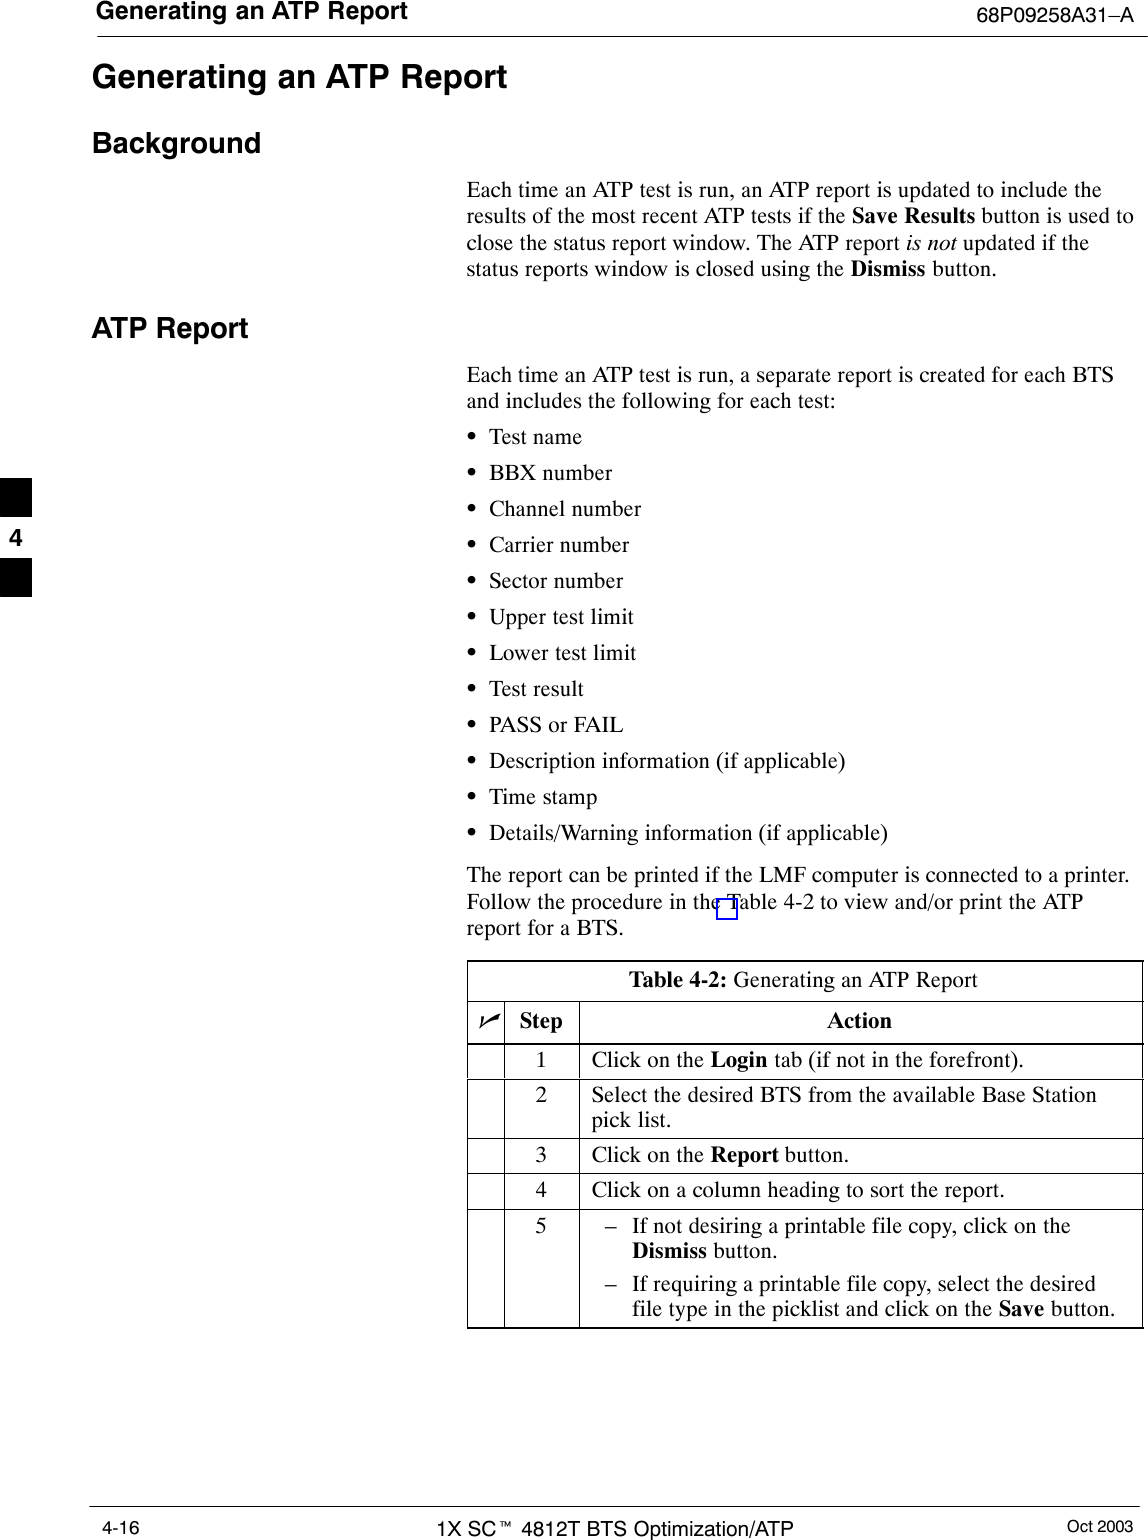 Generating an ATP Report 68P09258A31–AOct 20031X SCt 4812T BTS Optimization/ATP4-16Generating an ATP ReportBackgroundEach time an ATP test is run, an ATP report is updated to include theresults of the most recent ATP tests if the Save Results button is used toclose the status report window. The ATP report is not updated if thestatus reports window is closed using the Dismiss button.ATP ReportEach time an ATP test is run, a separate report is created for each BTSand includes the following for each test:STest nameSBBX numberSChannel numberSCarrier numberSSector numberSUpper test limitSLower test limitSTest resultSPASS or FAILSDescription information (if applicable)STime stampSDetails/Warning information (if applicable)The report can be printed if the LMF computer is connected to a printer.Follow the procedure in the Table 4-2 to view and/or print the ATPreport for a BTS.Table 4-2: Generating an ATP ReportnStep Action1Click on the Login tab (if not in the forefront).2Select the desired BTS from the available Base Stationpick list.3Click on the Report button.4Click on a column heading to sort the report.5– If not desiring a printable file copy, click on theDismiss button.– If requiring a printable file copy, select the desiredfile type in the picklist and click on the Save button.4